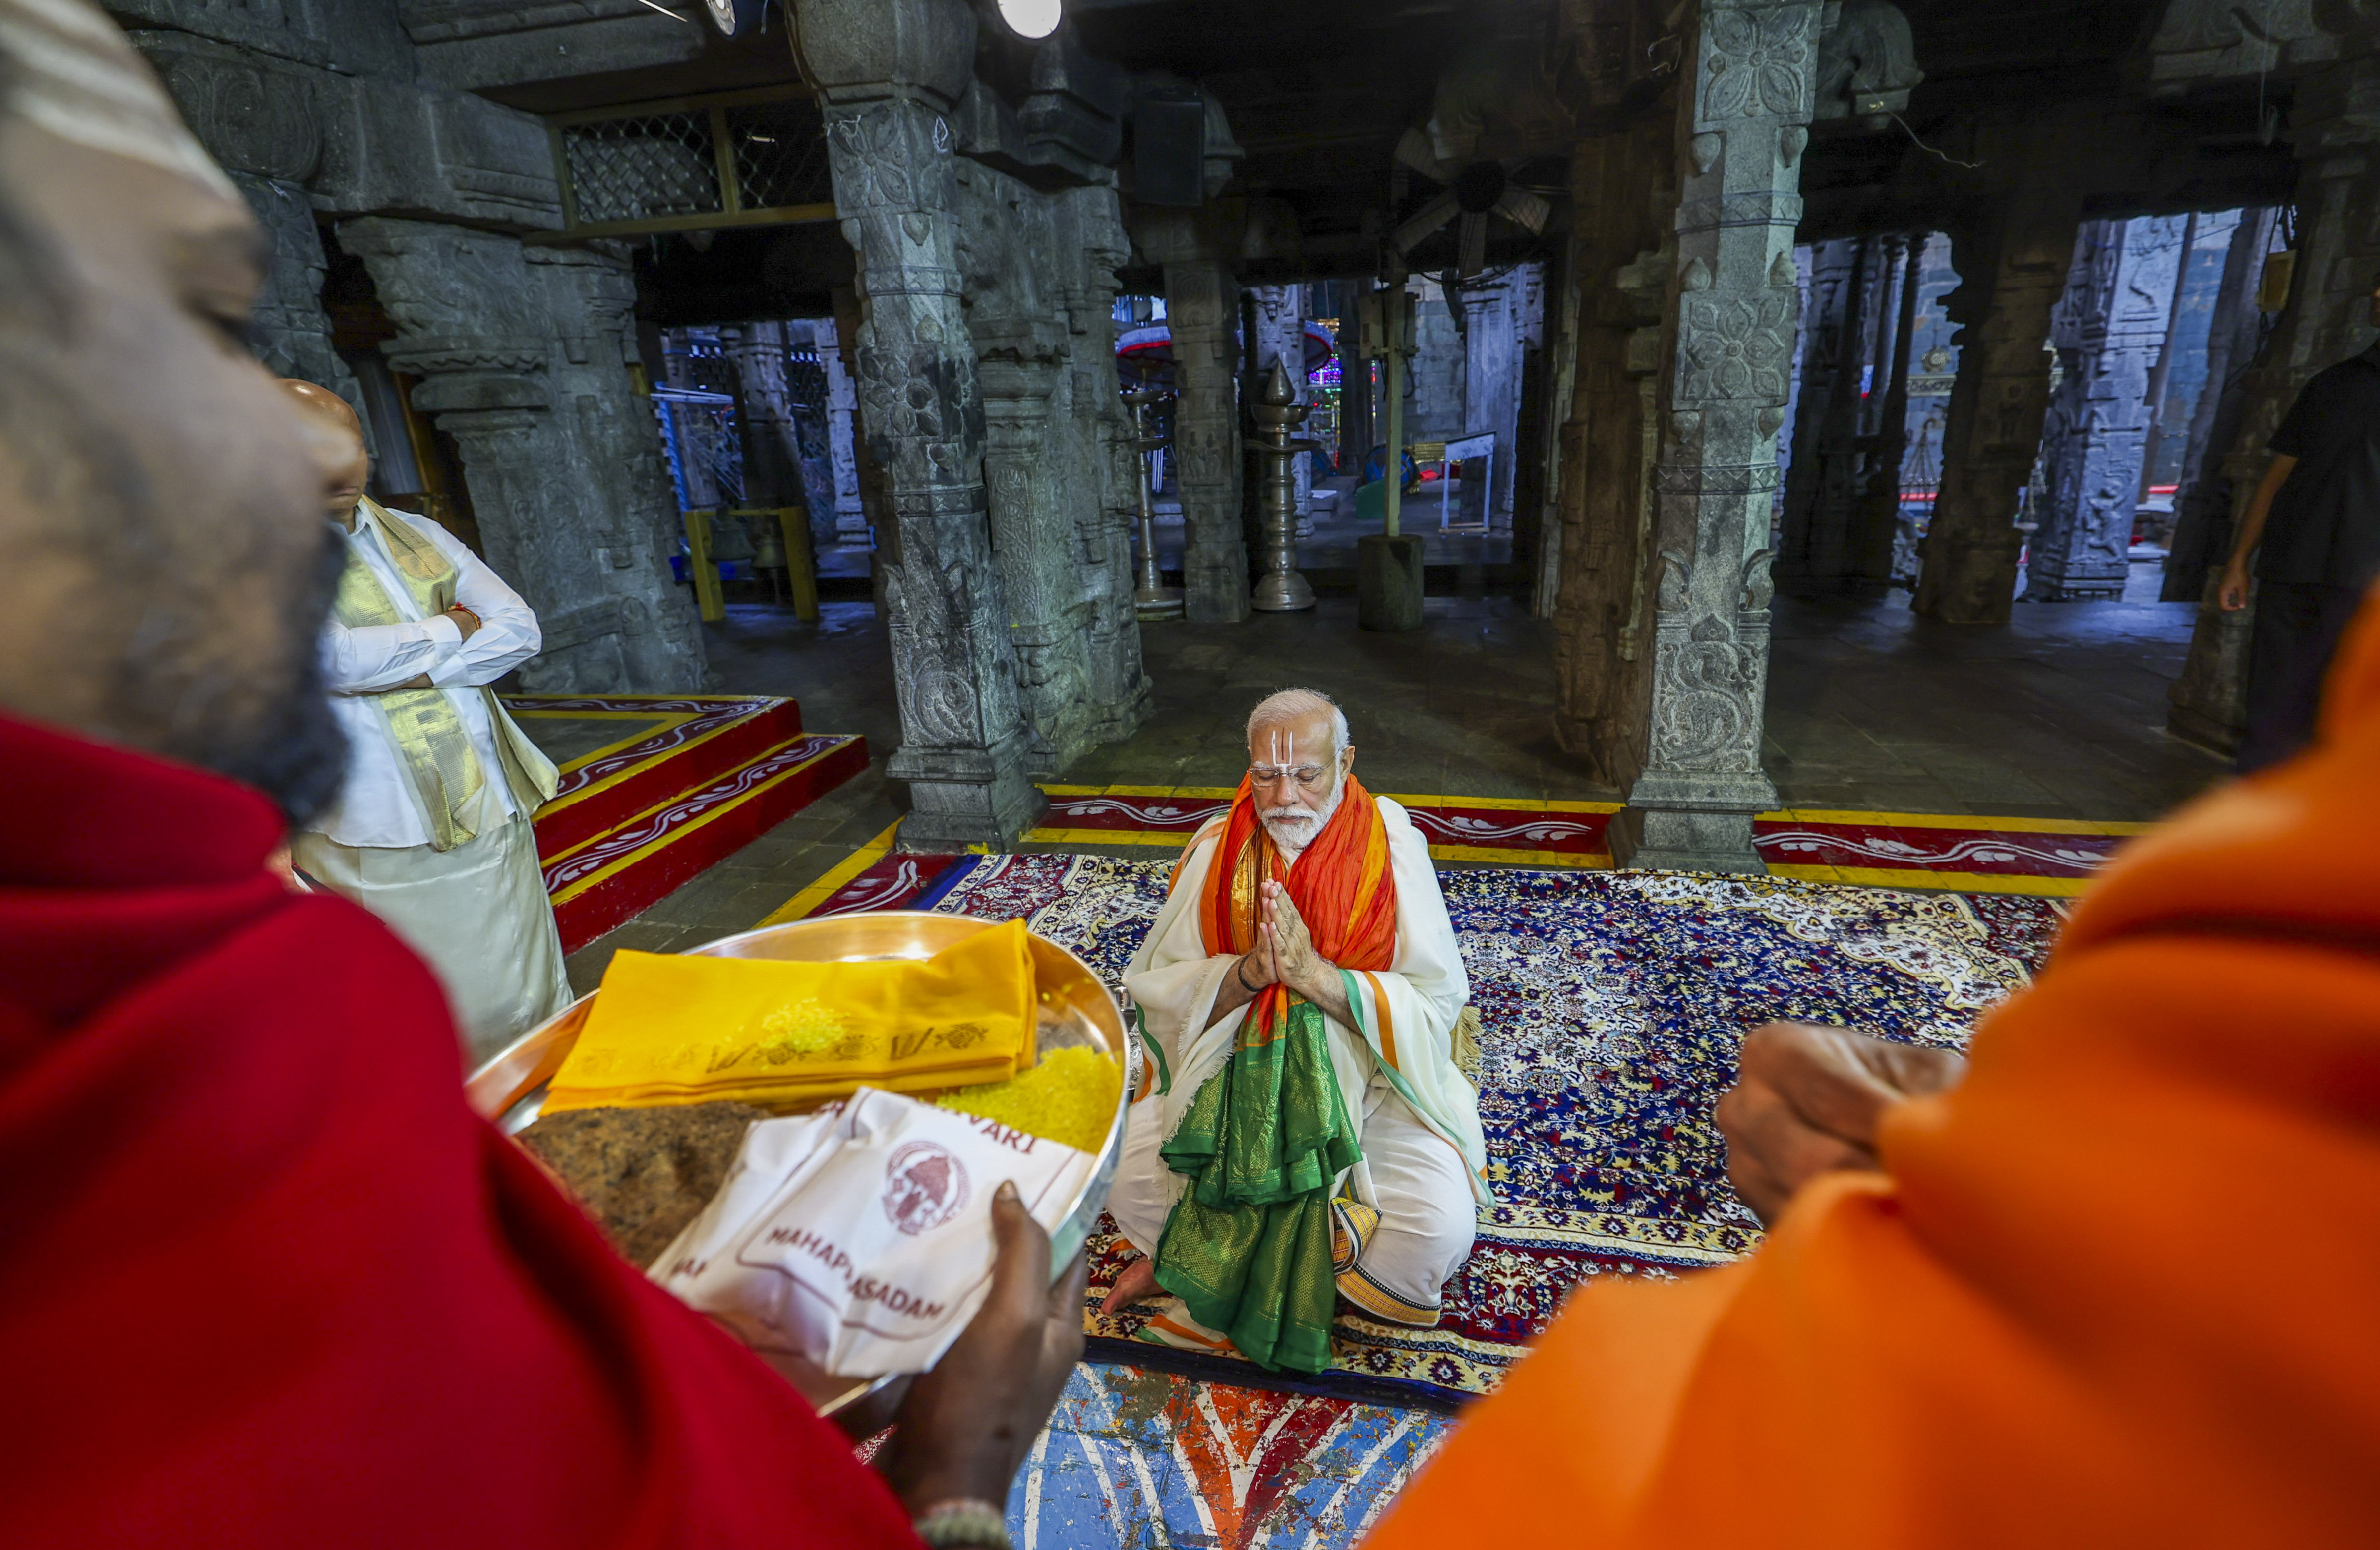 PM Modi performs vedic chants at the temple.